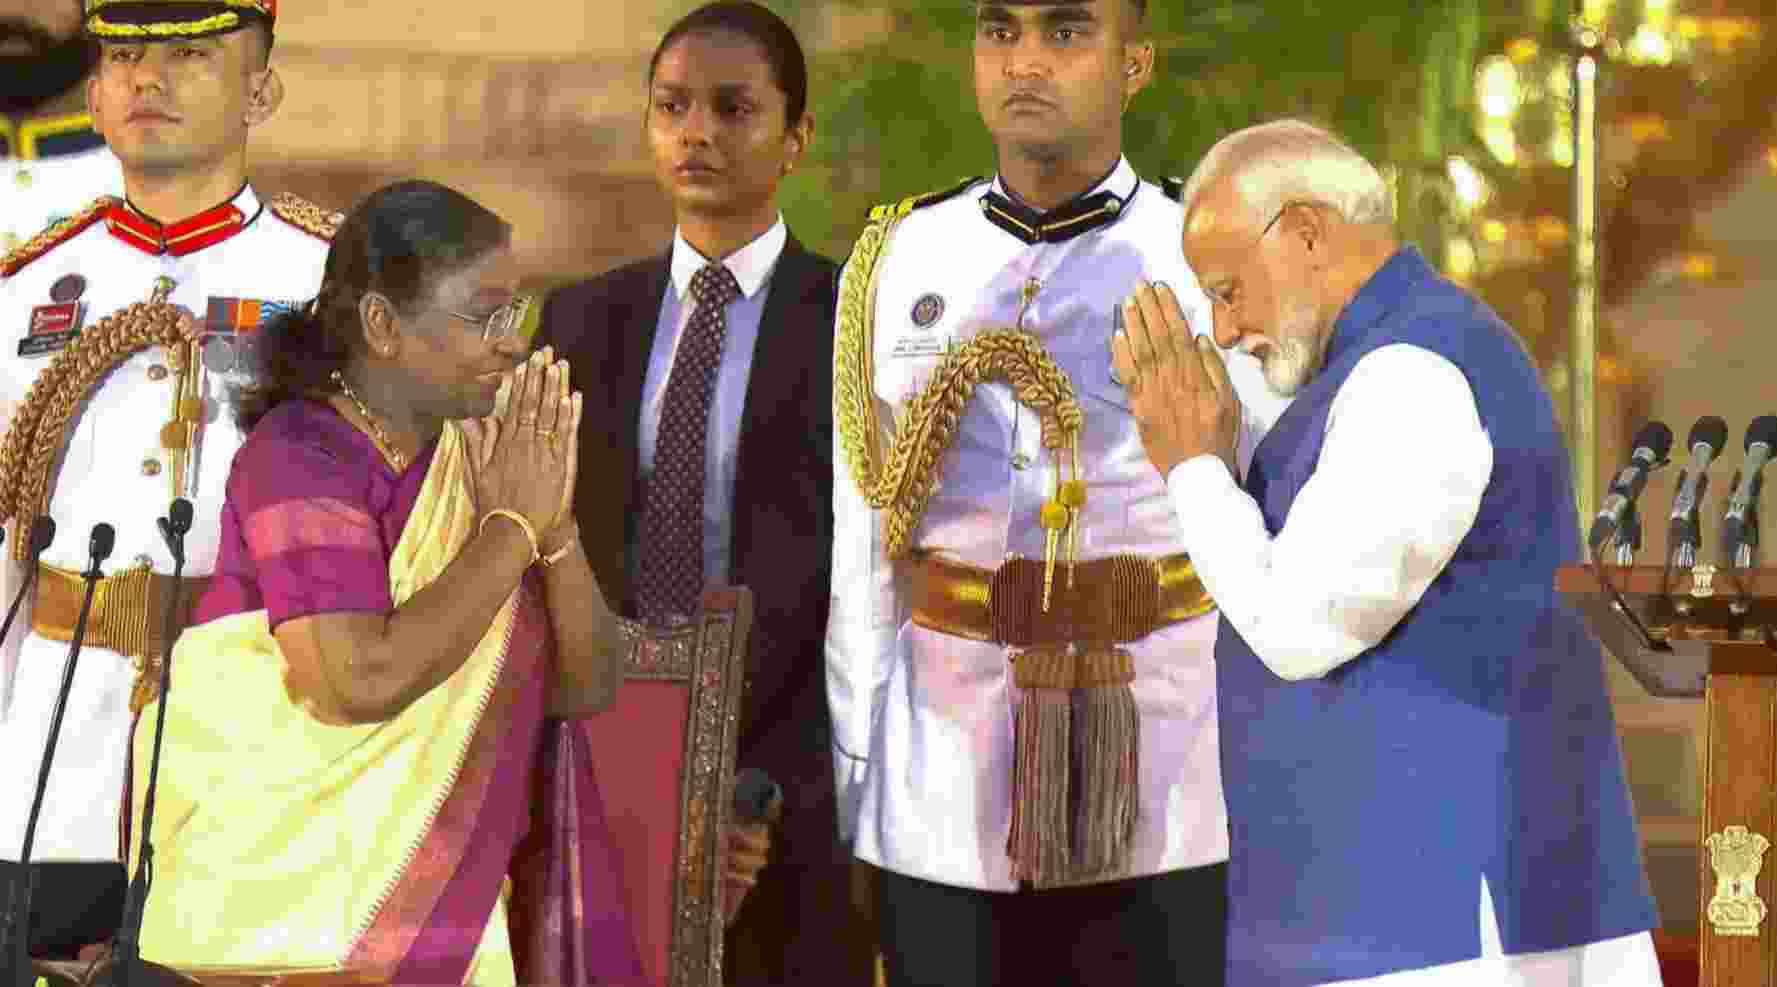 When he took oath as the prime minister for the first time in 2014, Modi had worn a cream linen kurta-pyjama with a beige golden jacket. For his 2019 swearing-in ceremony, the prime minister had chosen a similar ethnic outfit paired with a beige jacket.